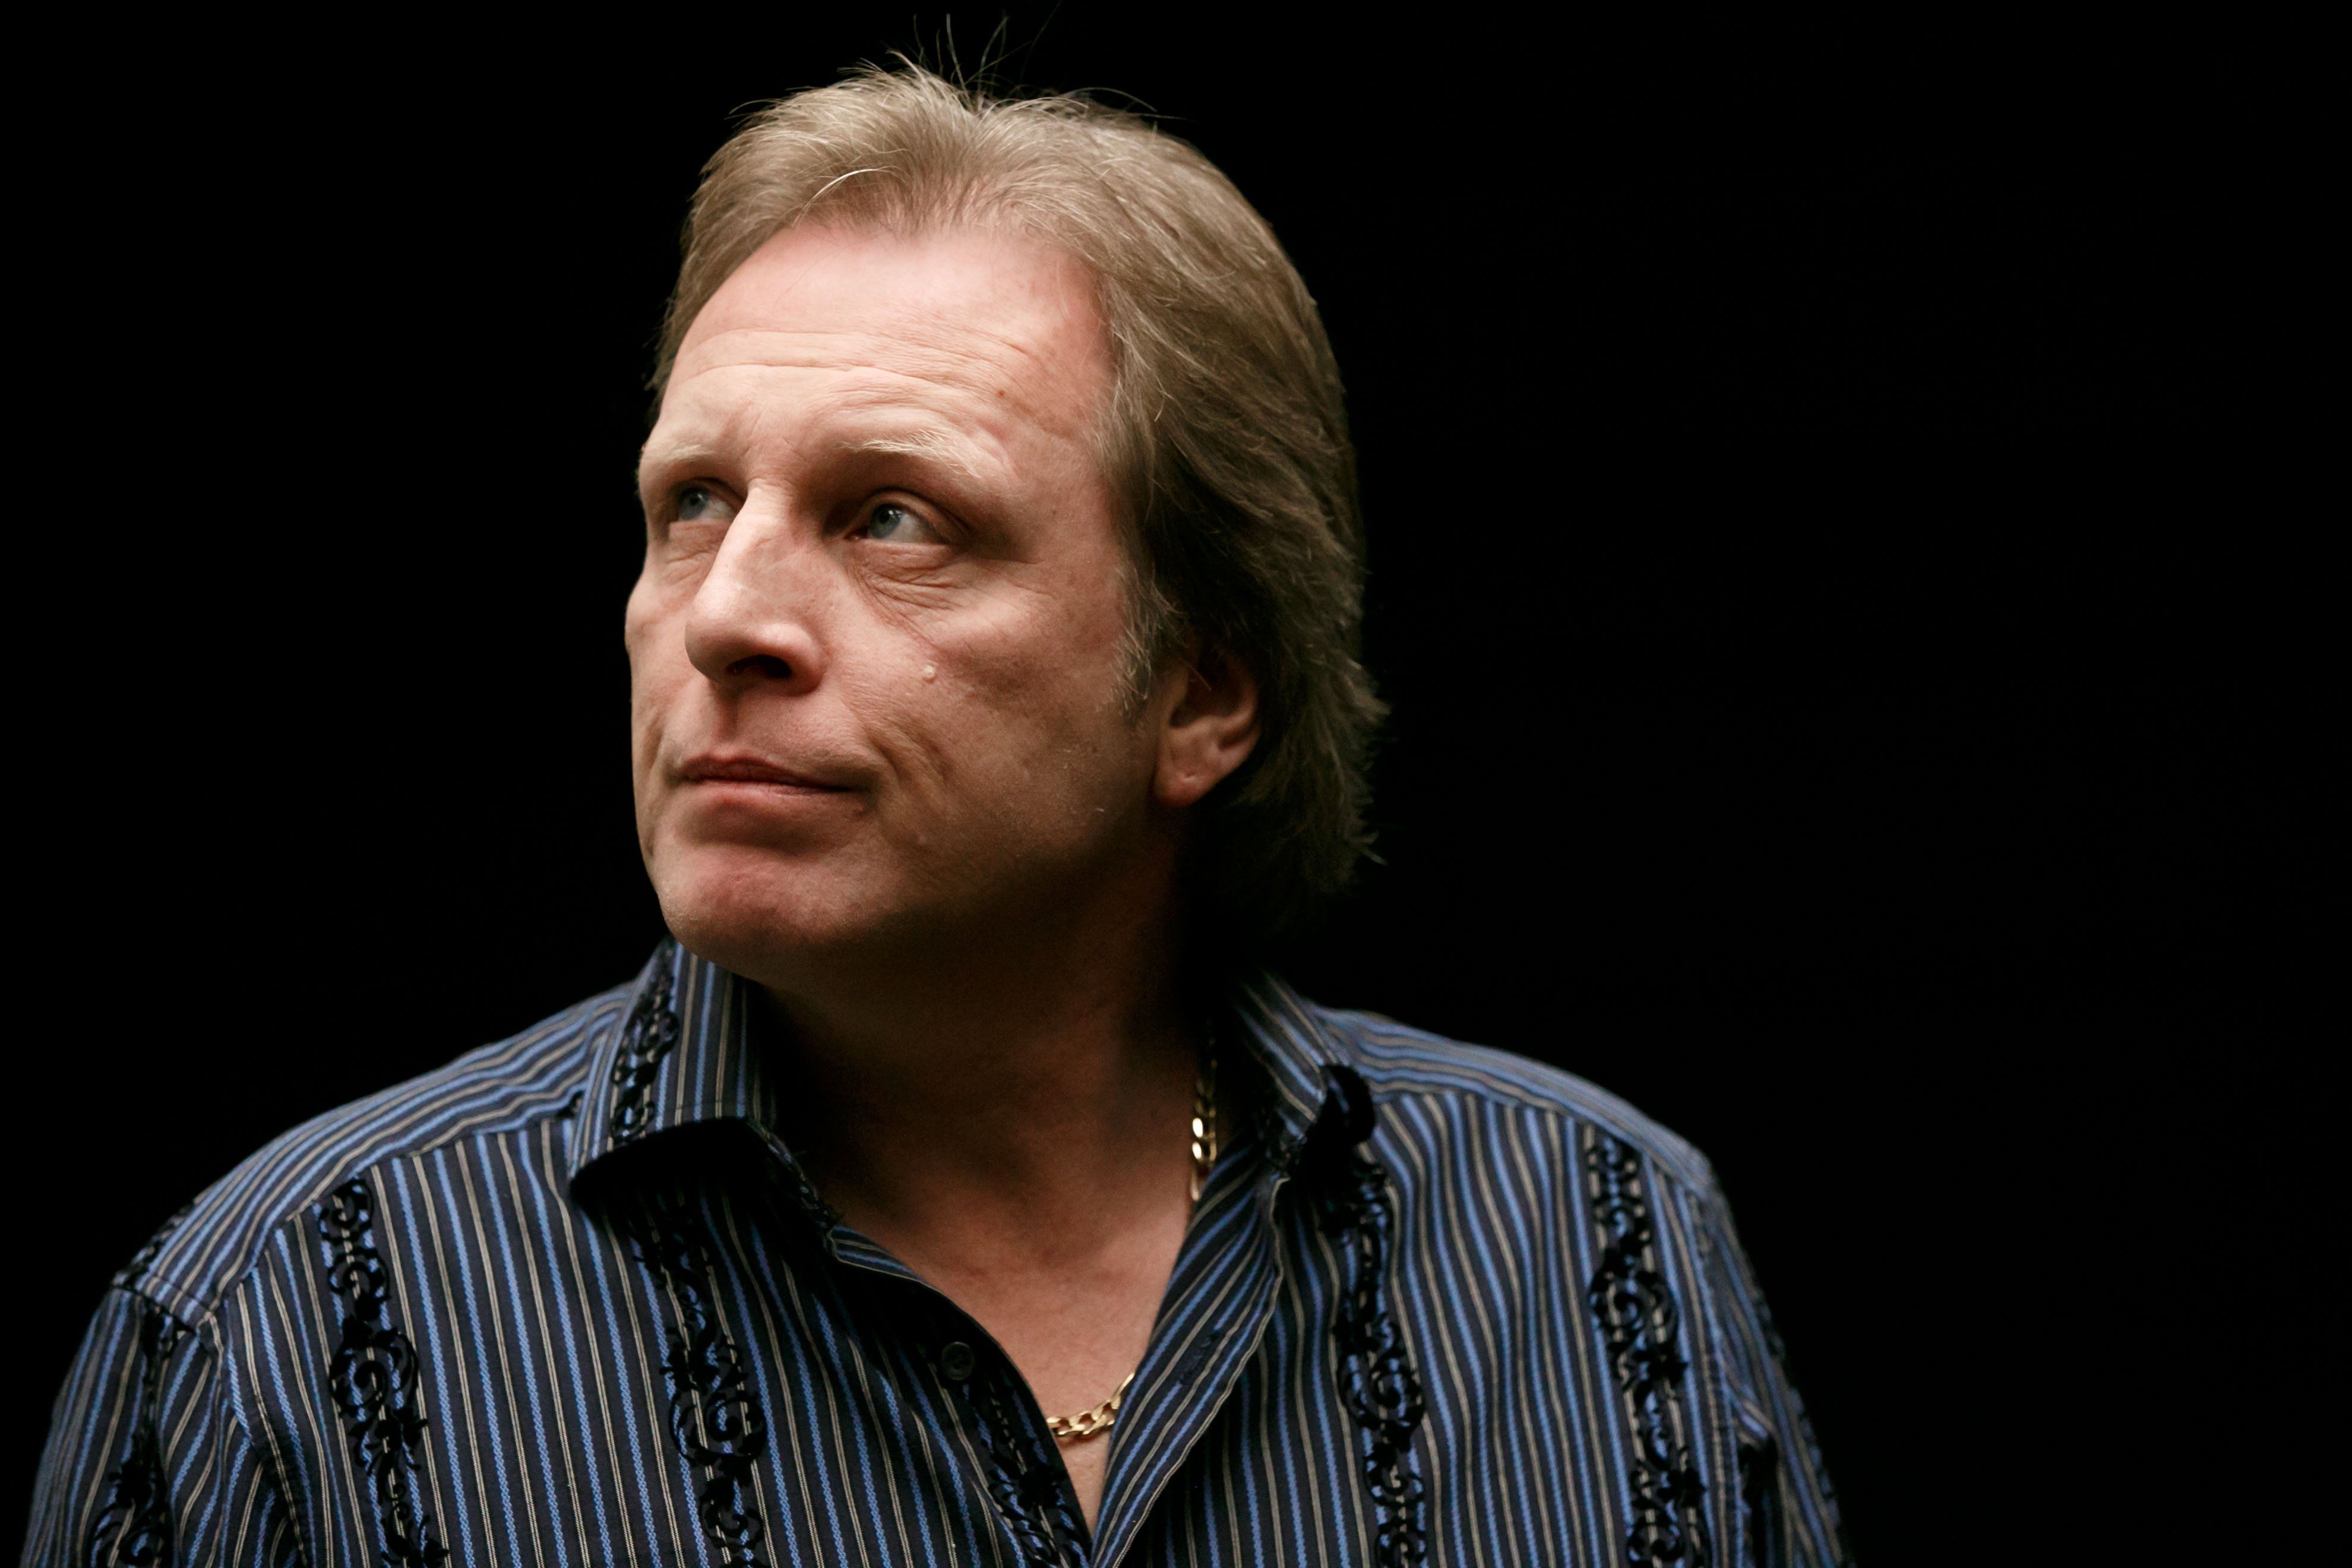 Estranged daughter sues Deadliest Catch star Sig Hansen, alleging she was molested as a child The Seattle Times